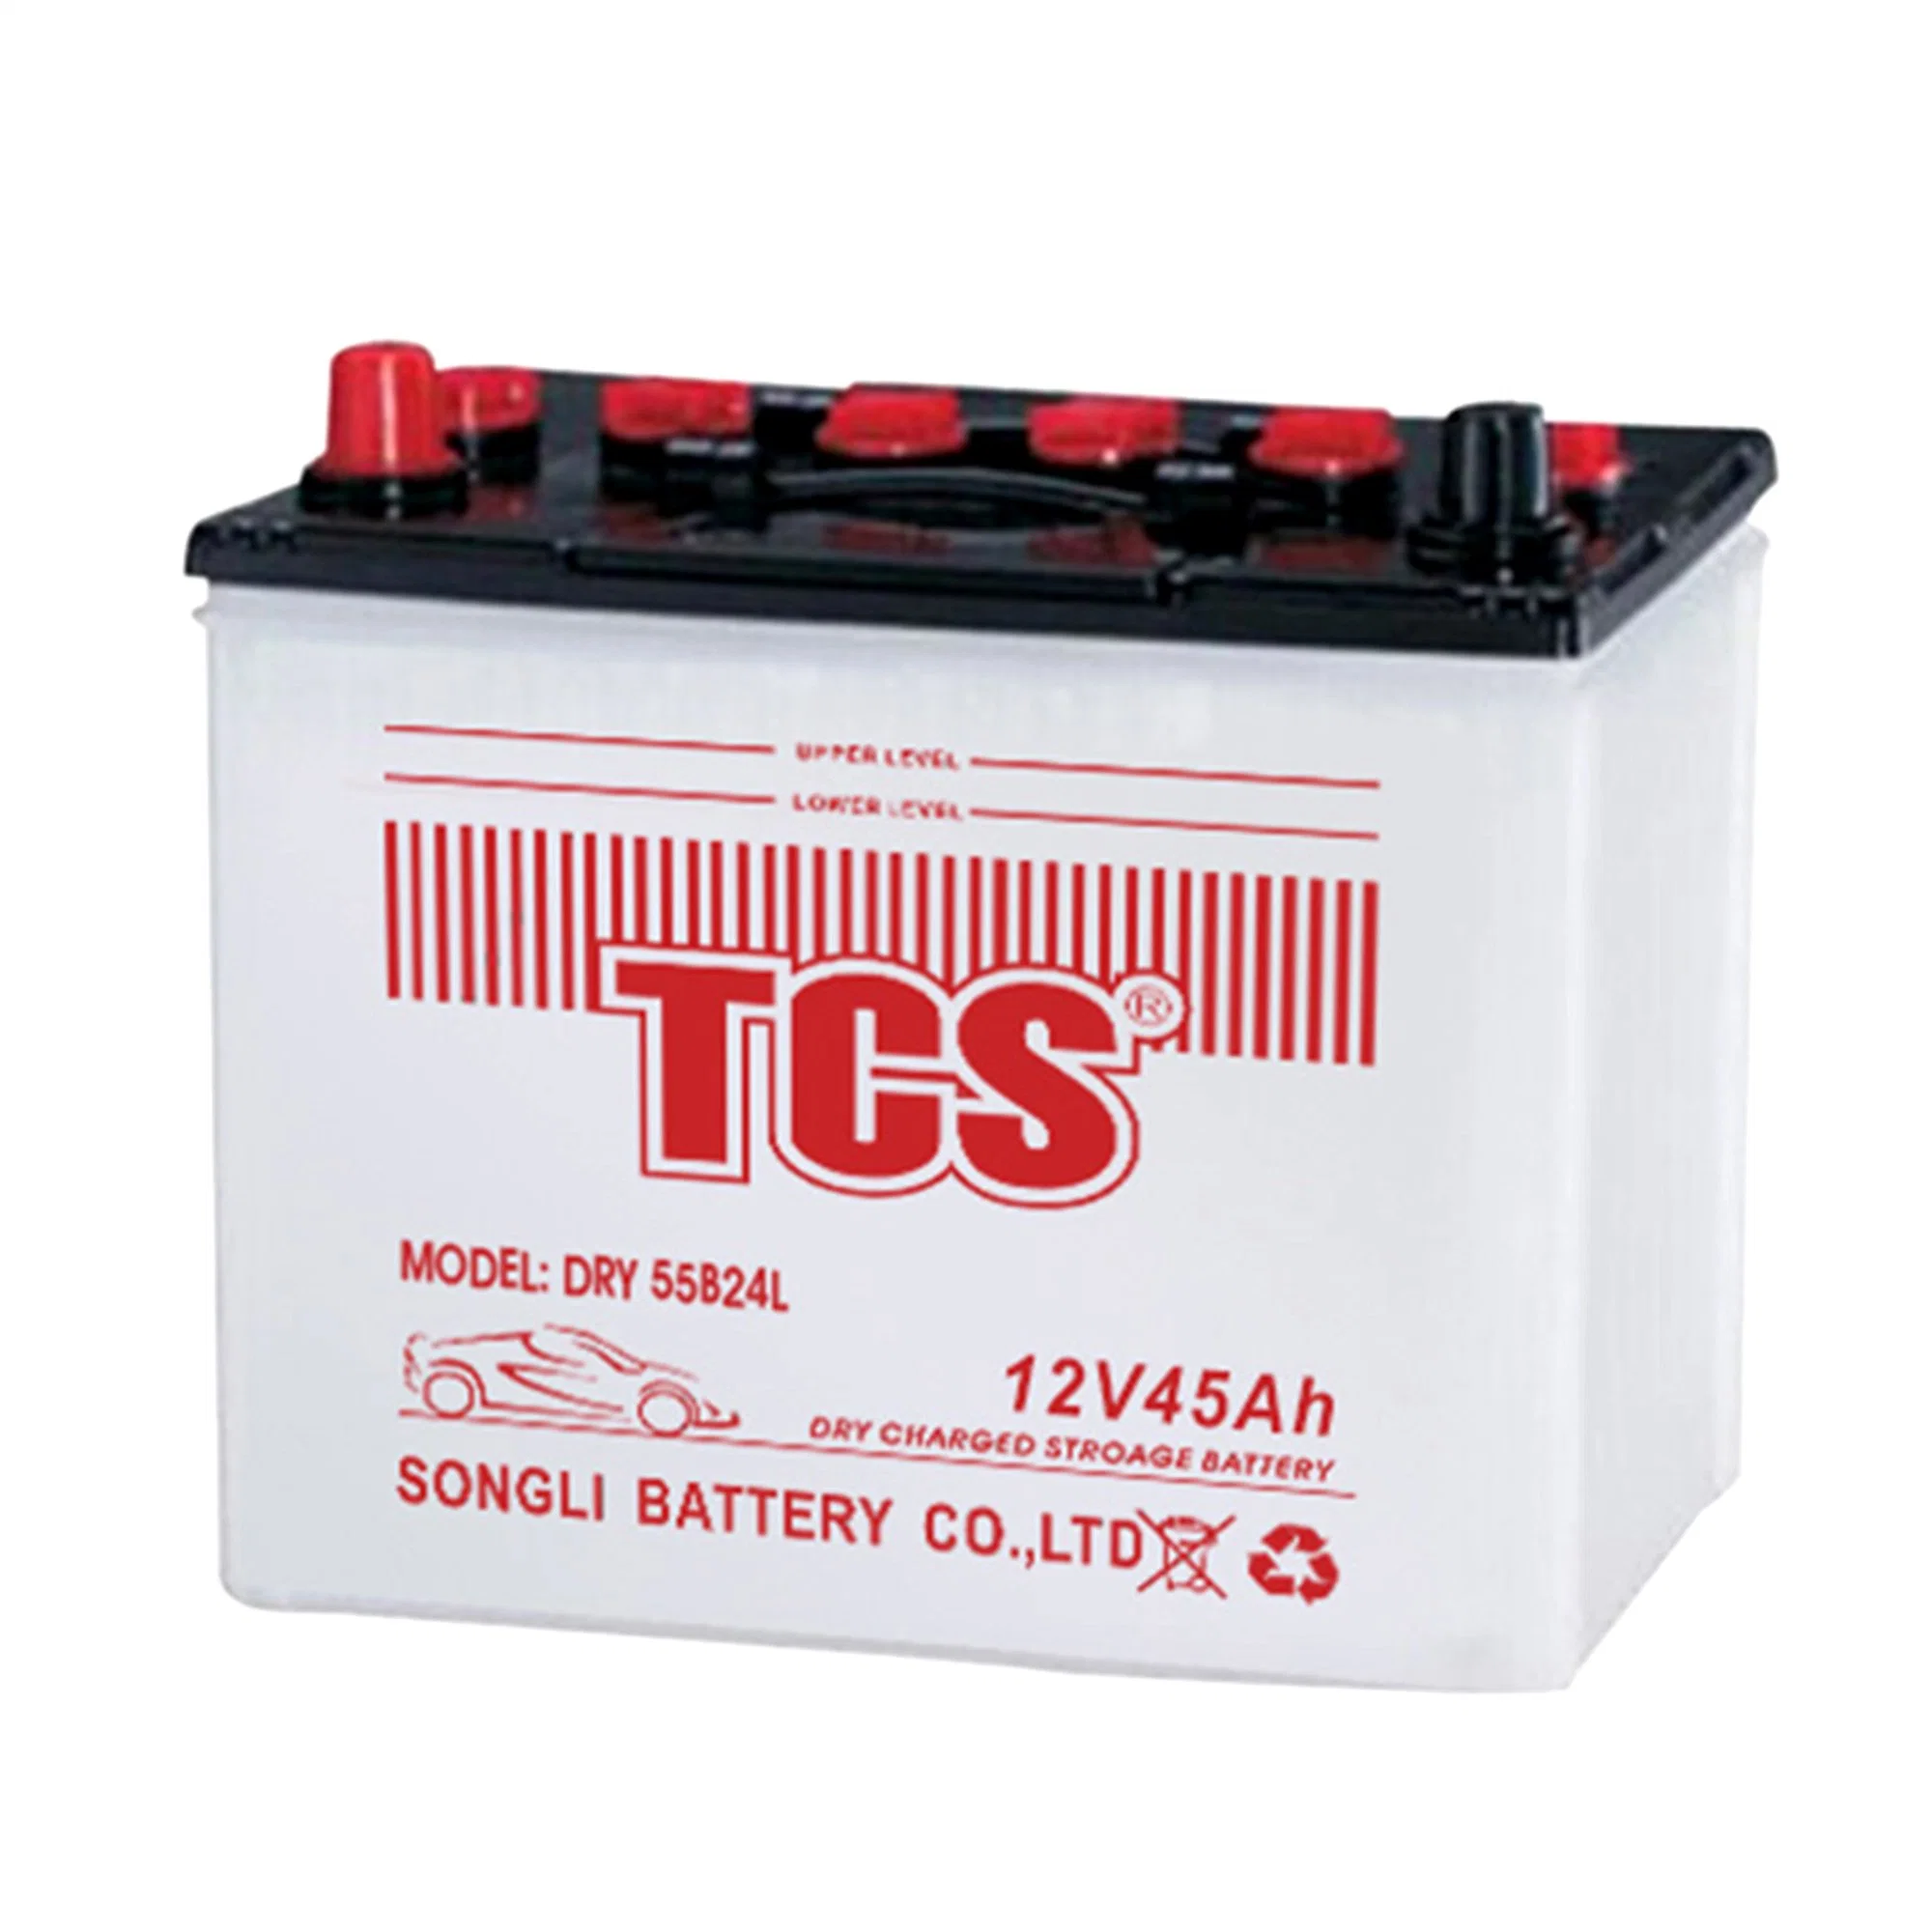 China High Quality Battery 12V 45AH Dry Charged Automobile Car Battery for Most Car